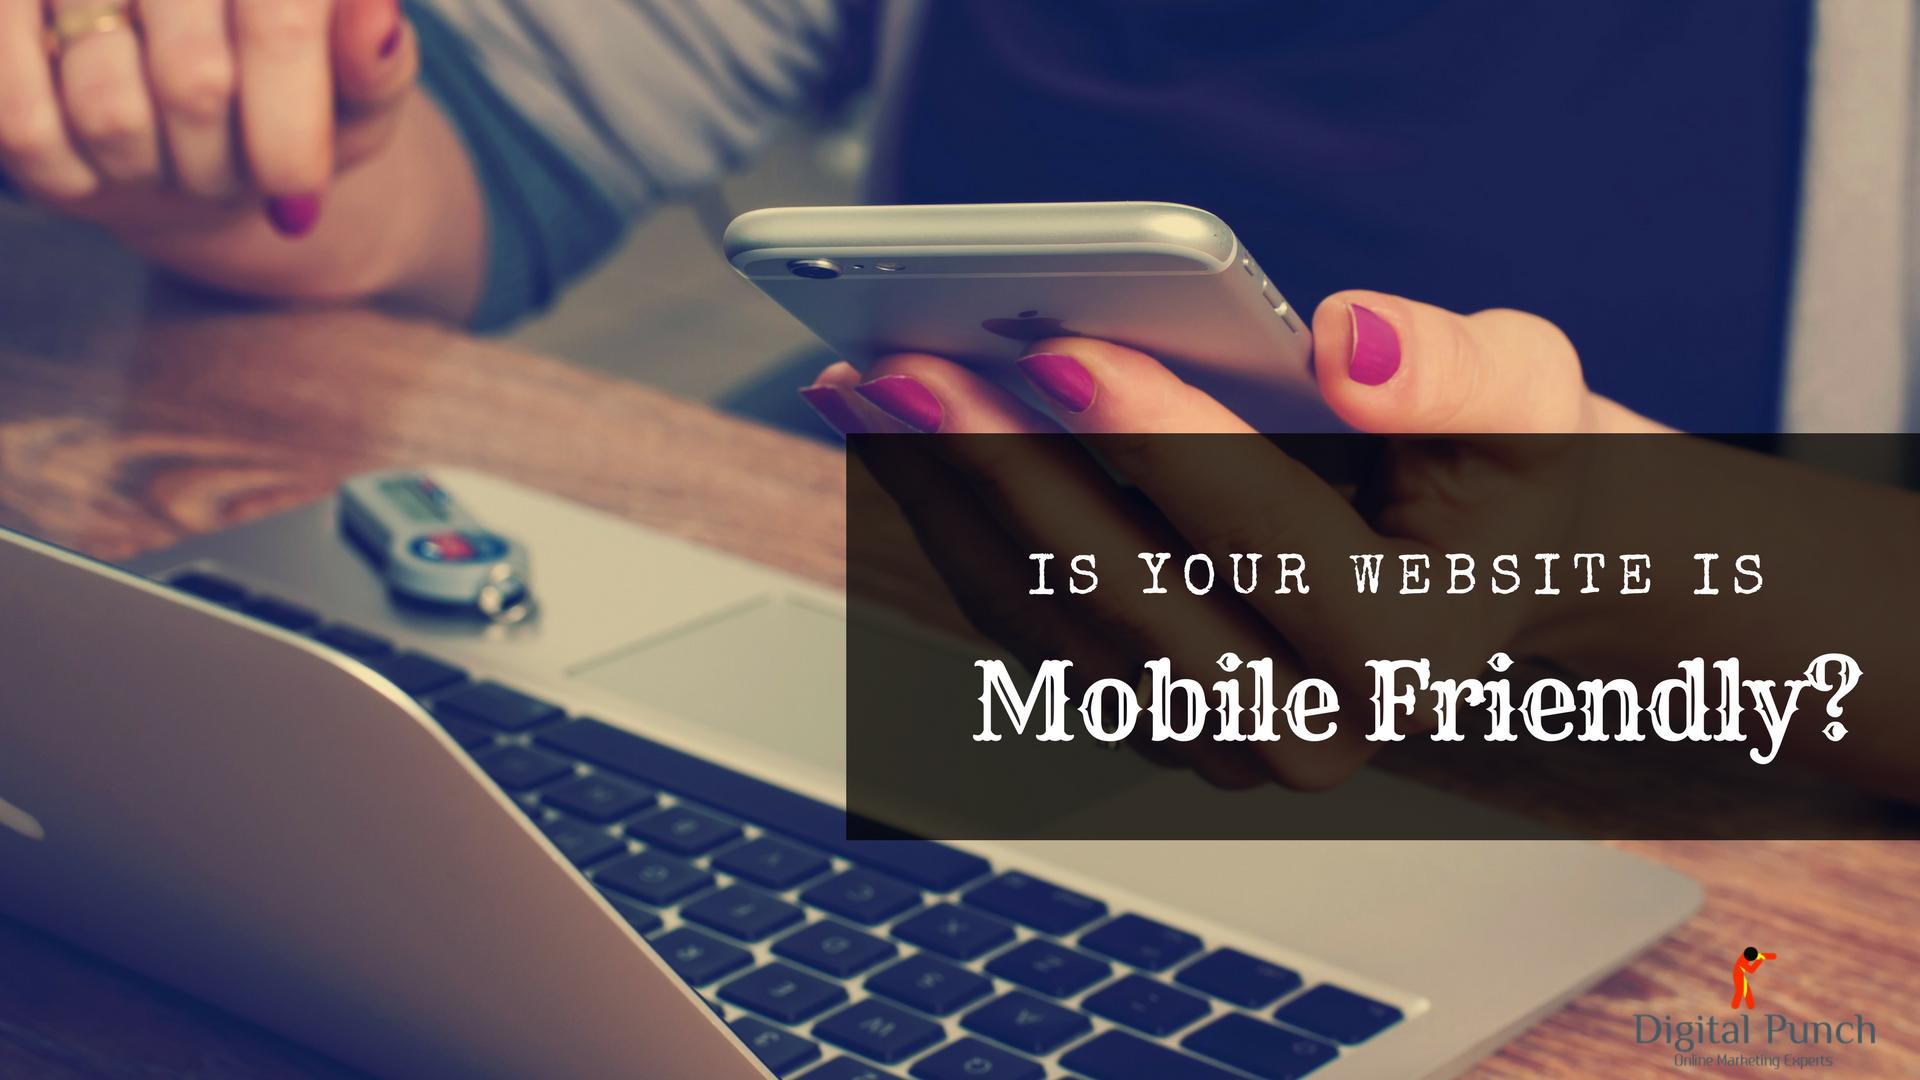 Is your website is mobile friendly? Get a mobile friendly website design - Digital Punch 